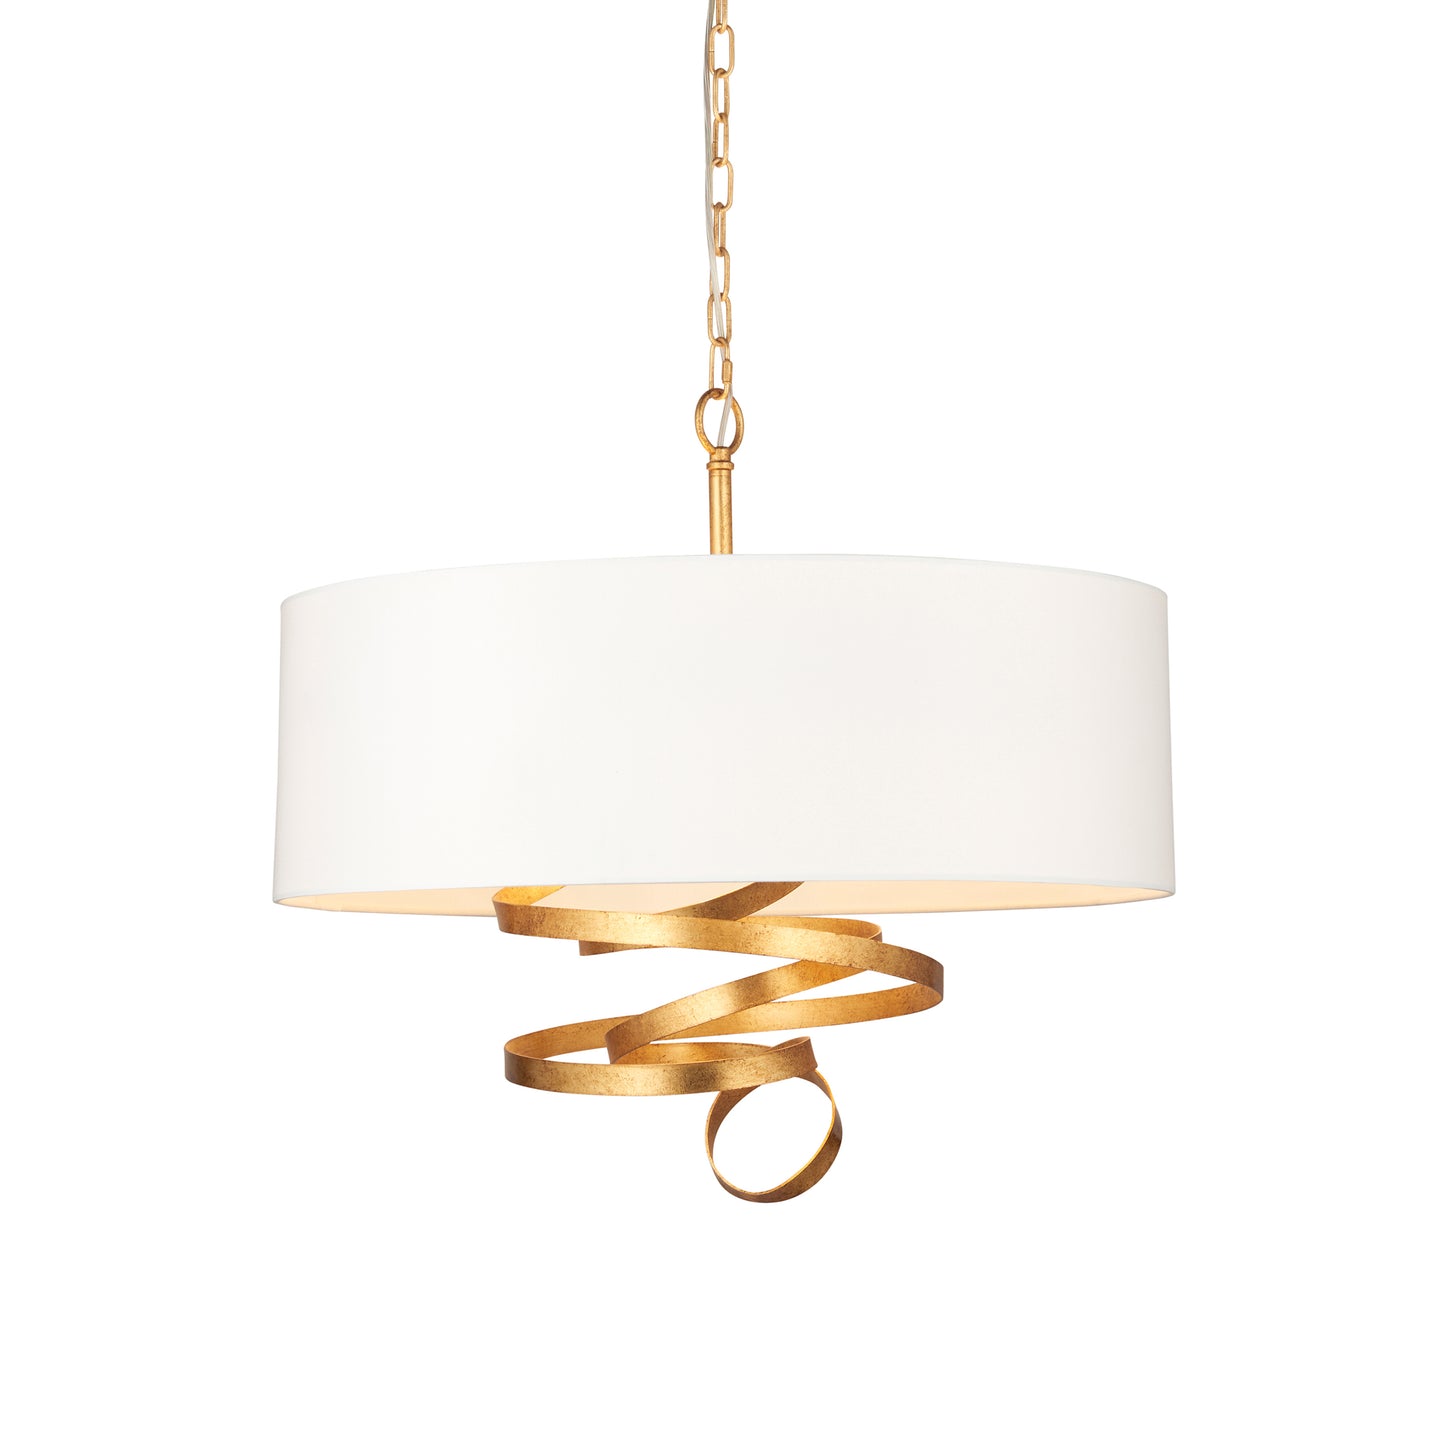 A Godfrey Ceiling Light Gold pendant light with a white shade for stylish home interior decor.